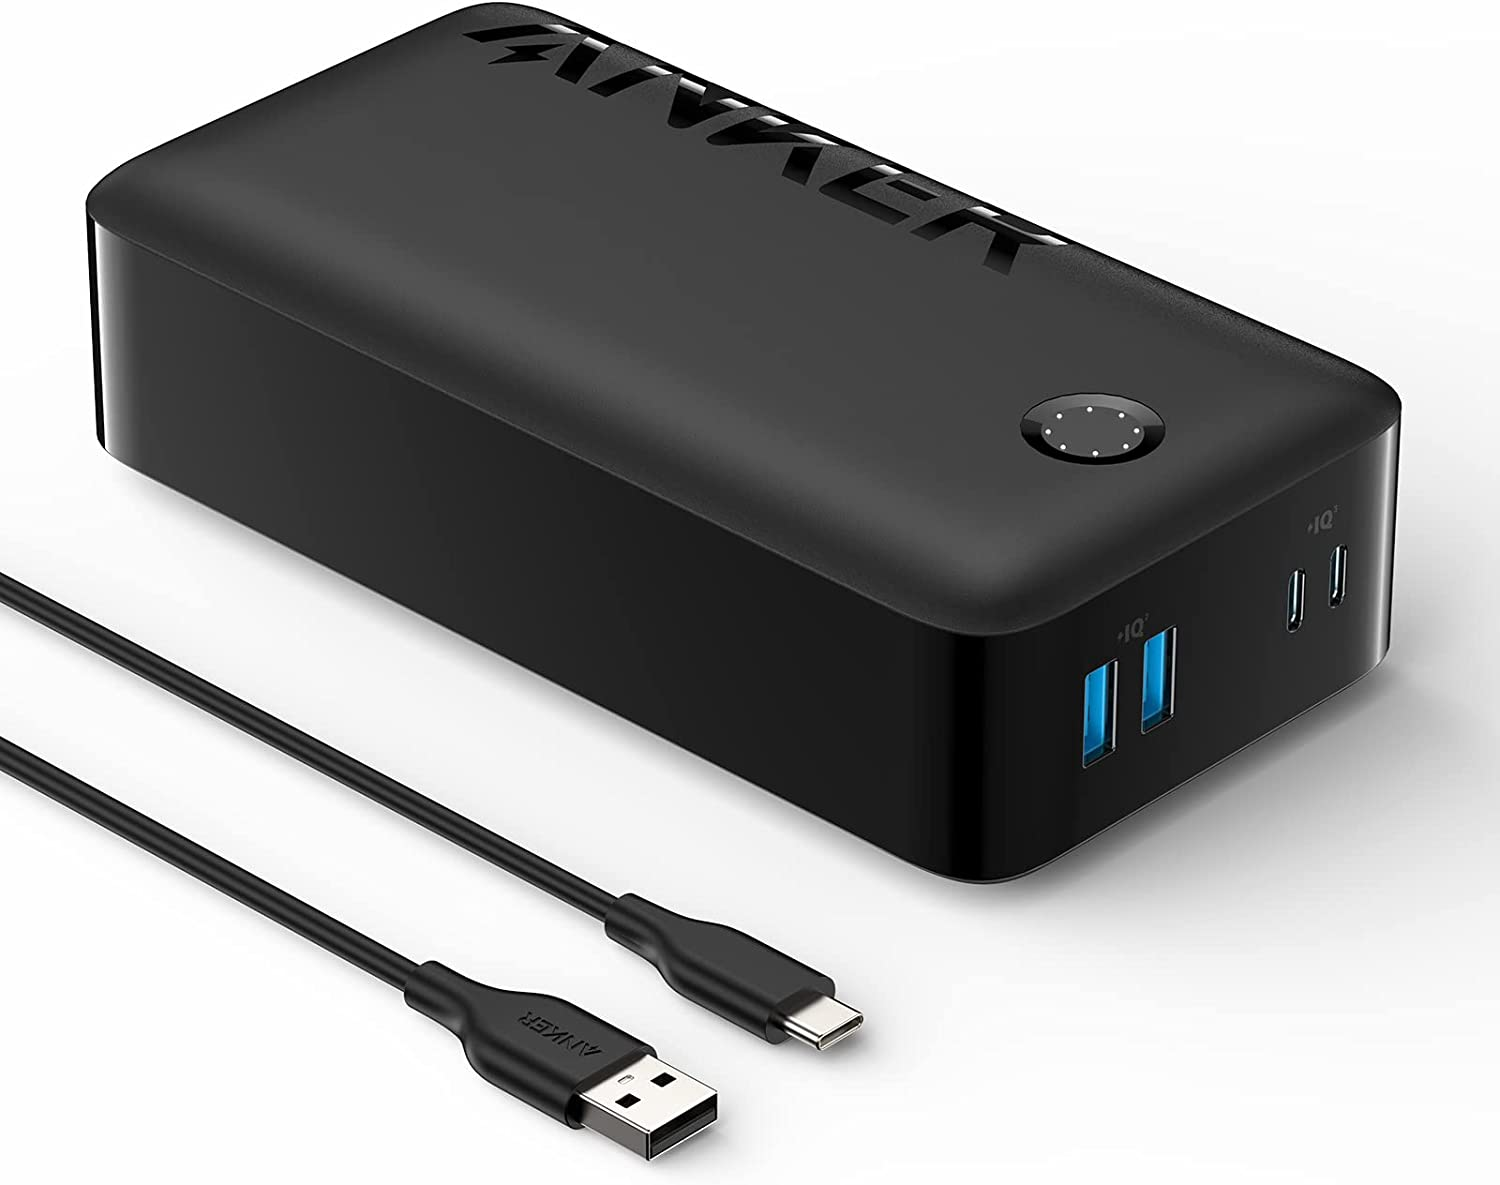 Anker Powerbank 10,000 mAh, 323 Power Bank with USB-C Port (Input &  Output), Small But Strong External Mobile Phone Battery, Powercore for  iPhone